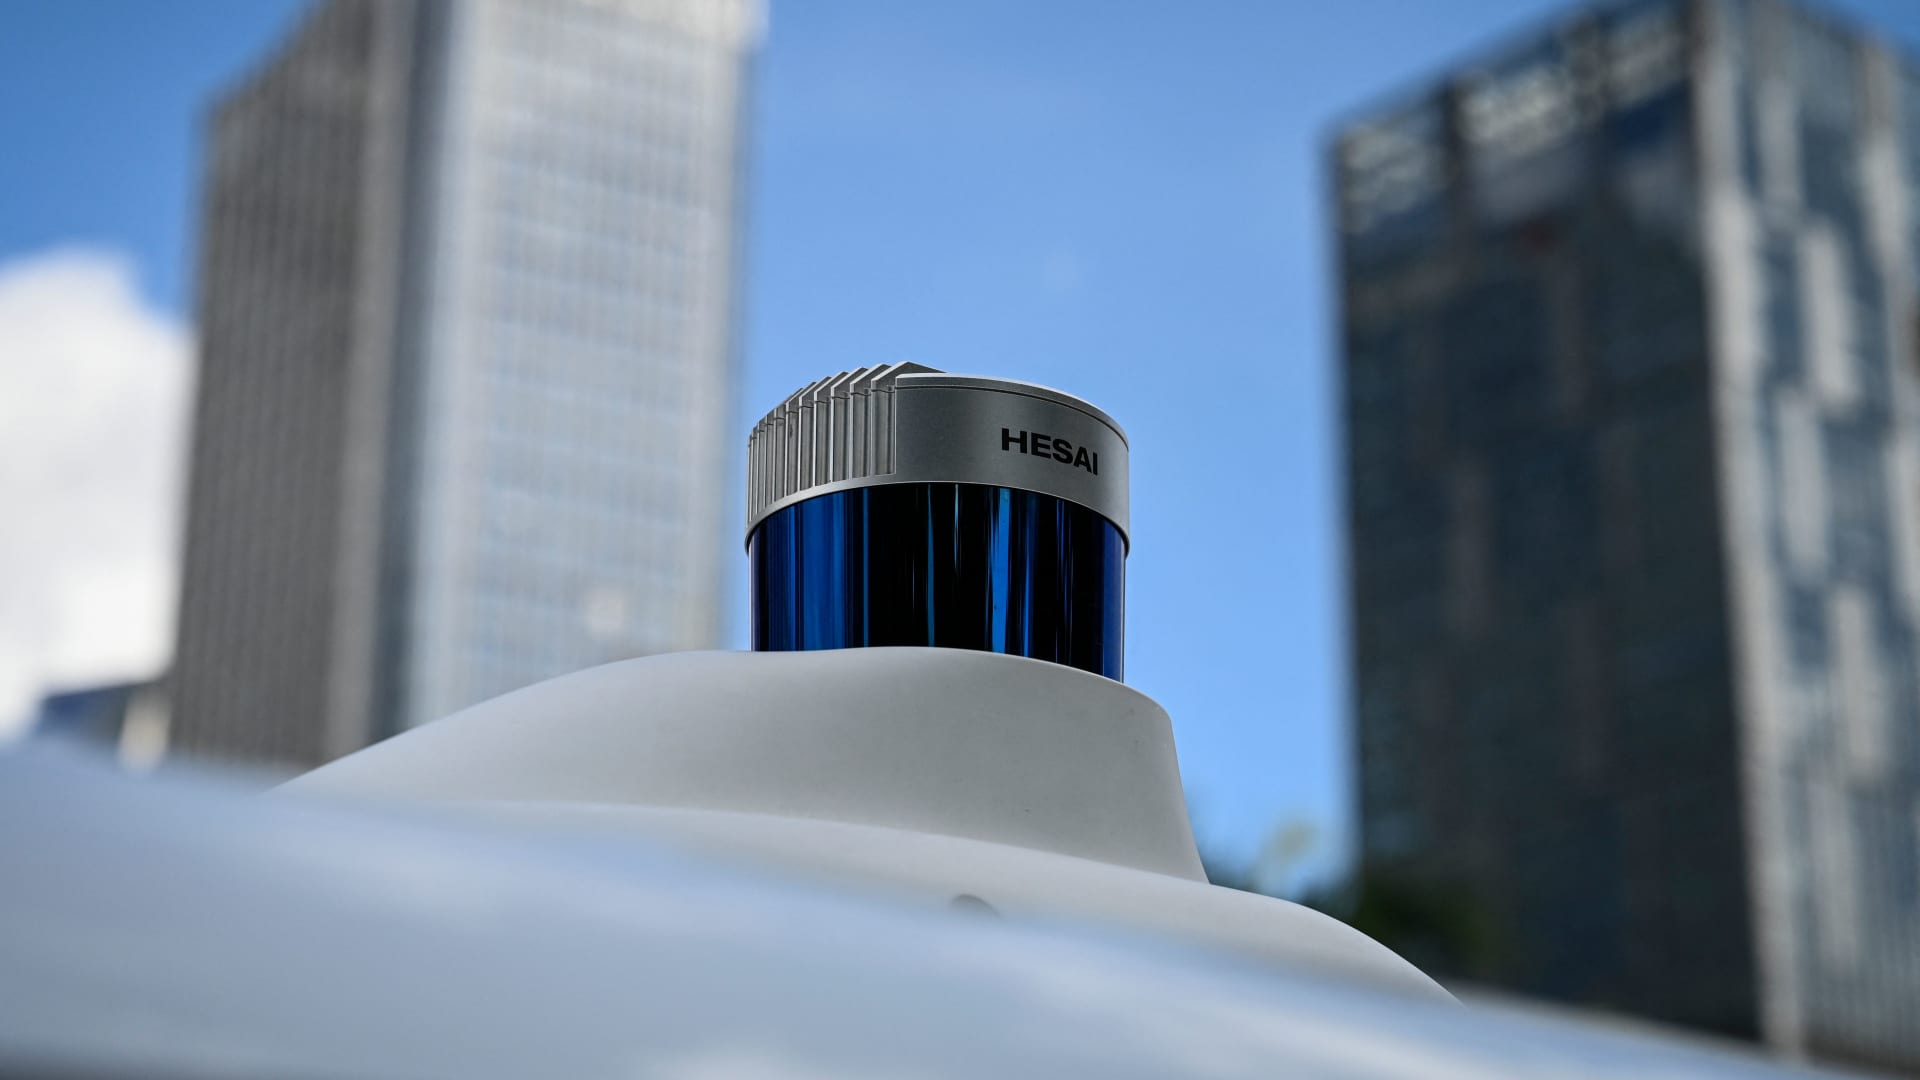 Chinese lidar maker Hesai to raise up to $171 million in U.S. IPO